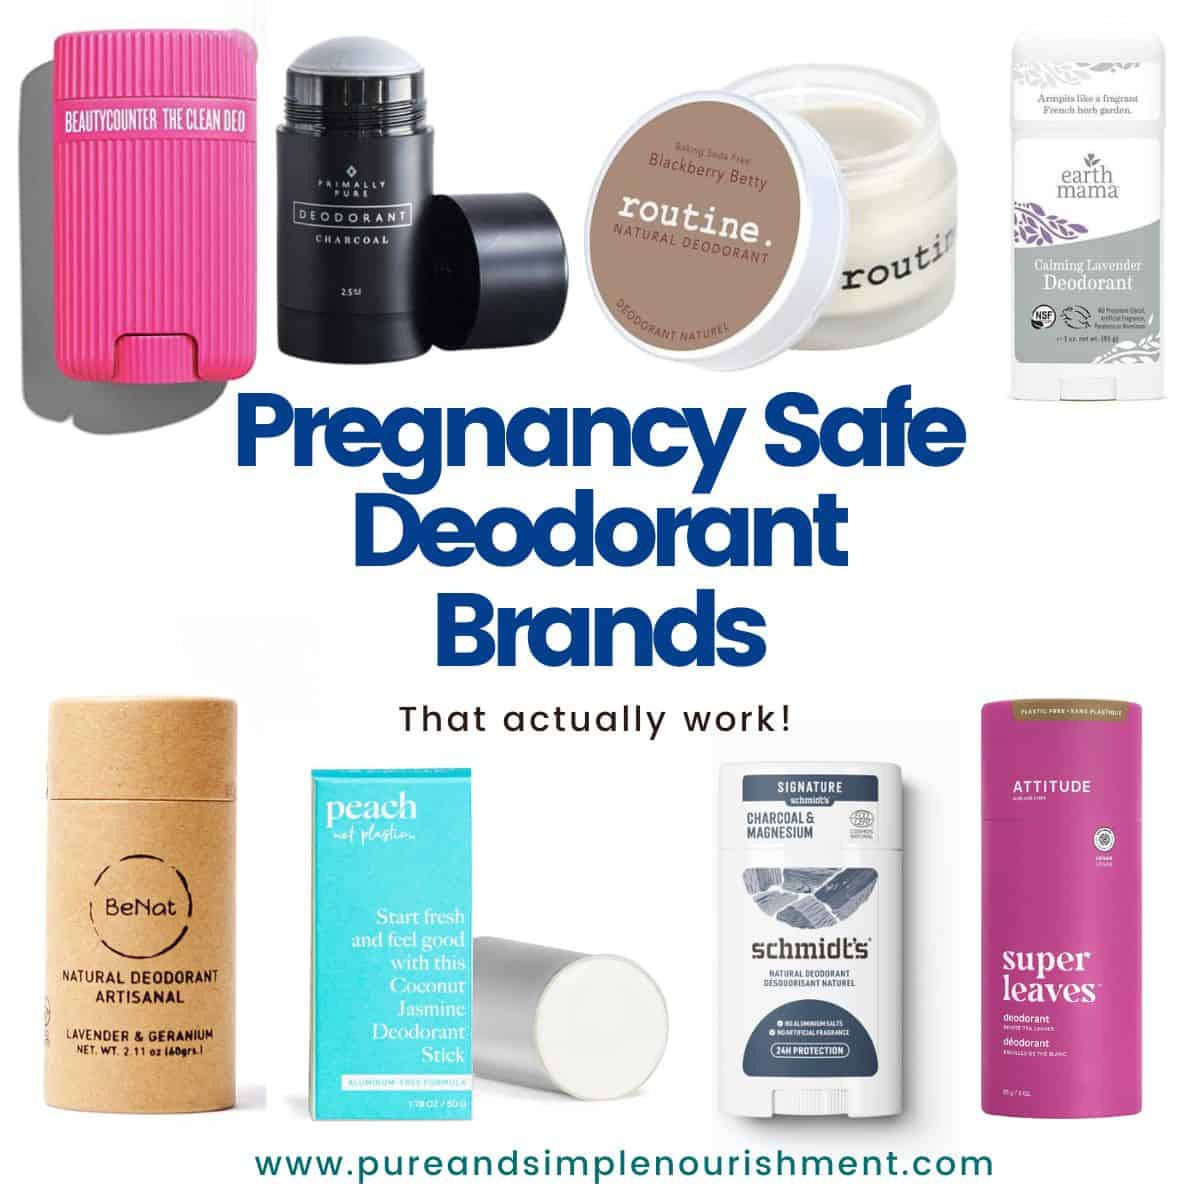 A collage of many different deodorants with the title "Pregnancy Safe Deodorant Brands" oven them.